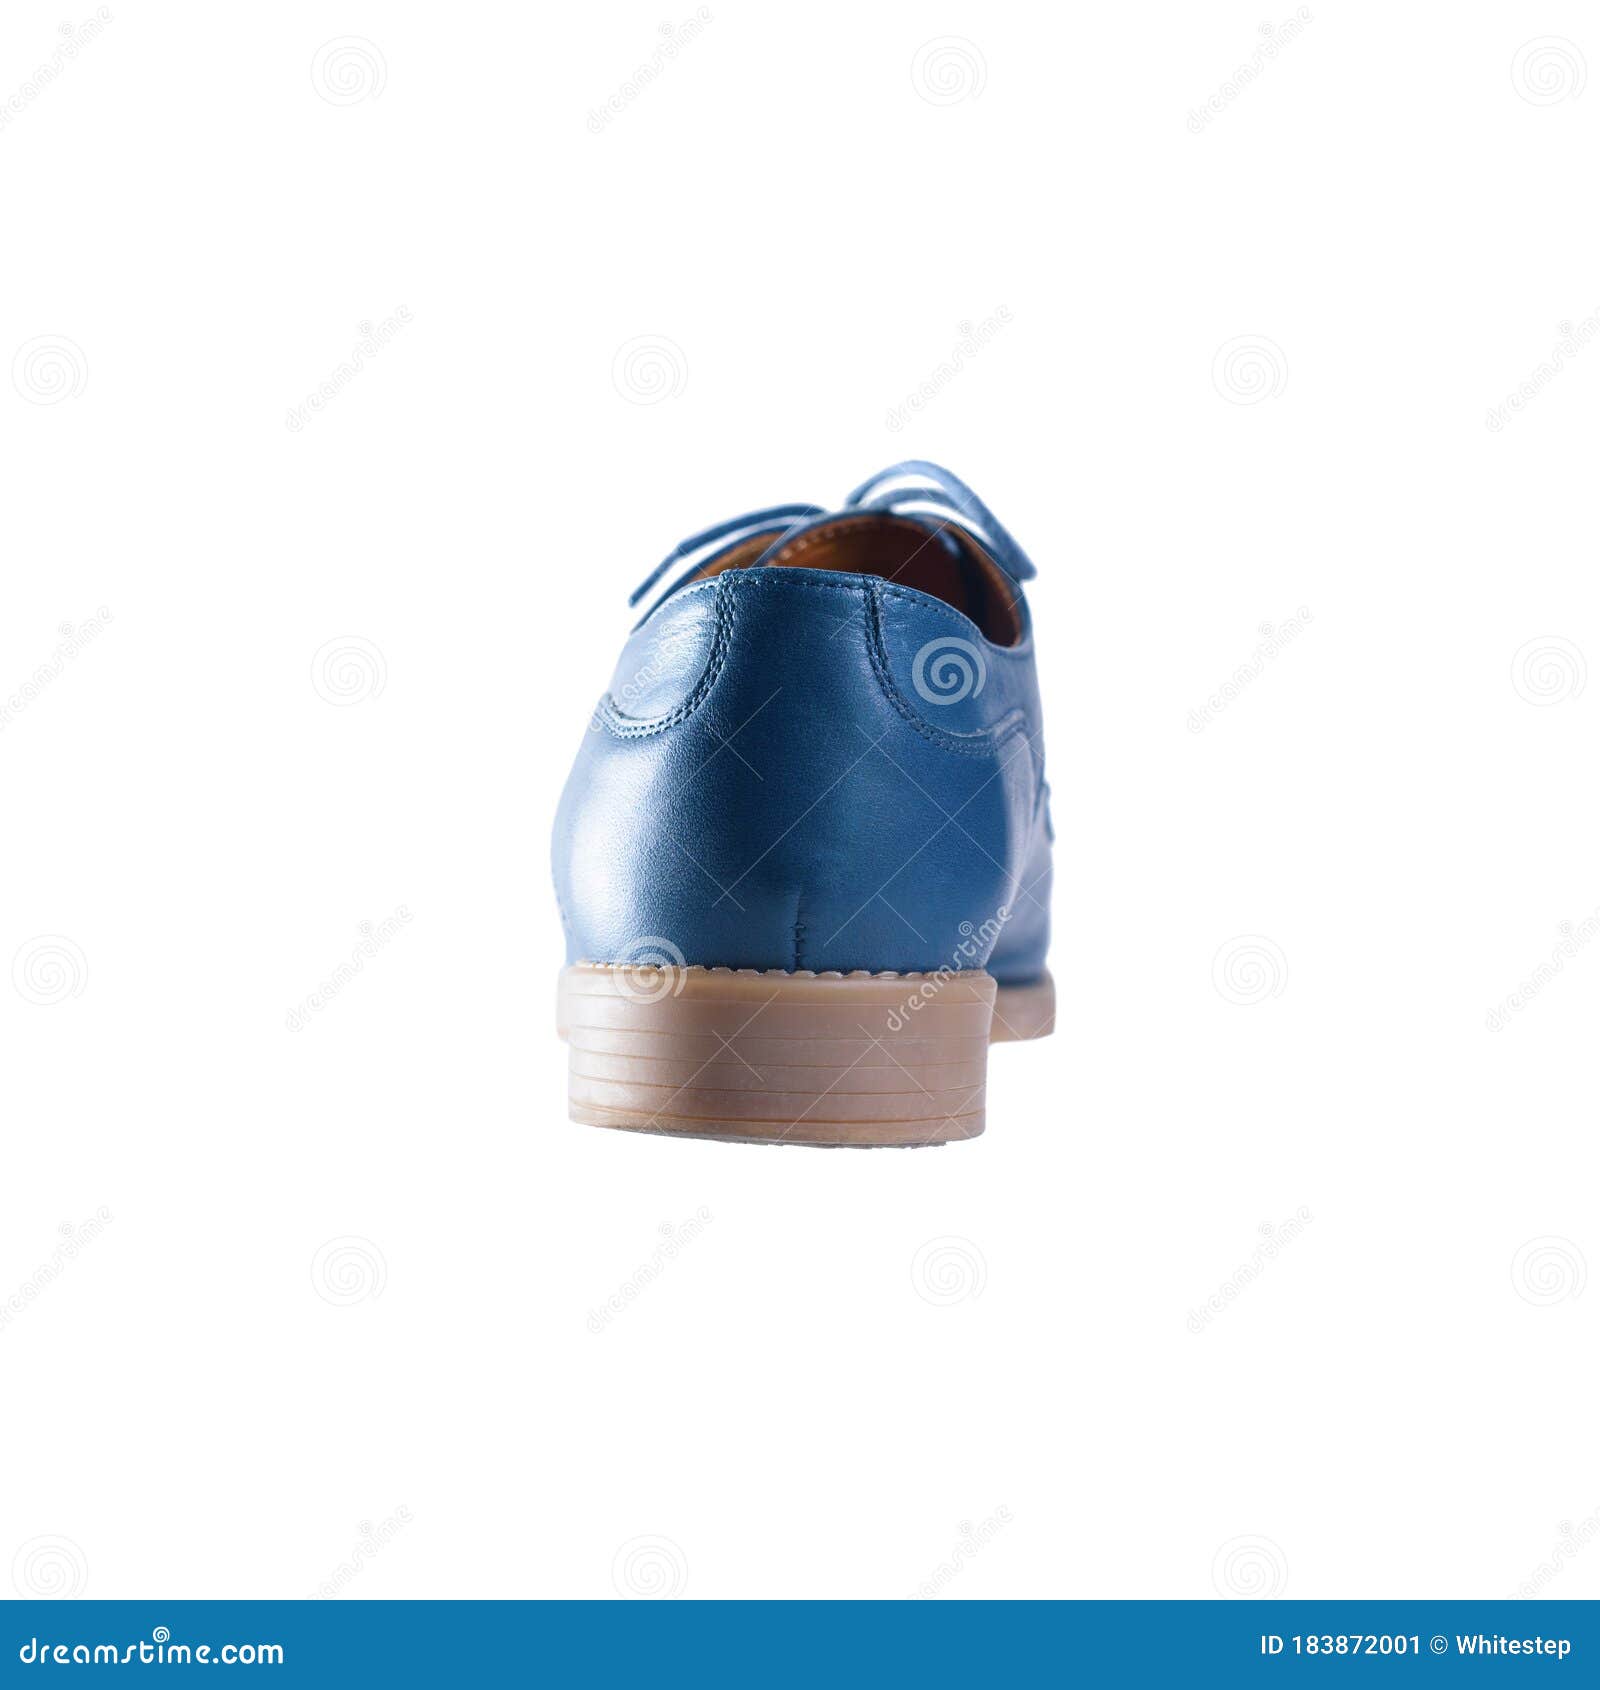 Blue Leather Shoes in Perspective and Isolated on White Stock Image ...